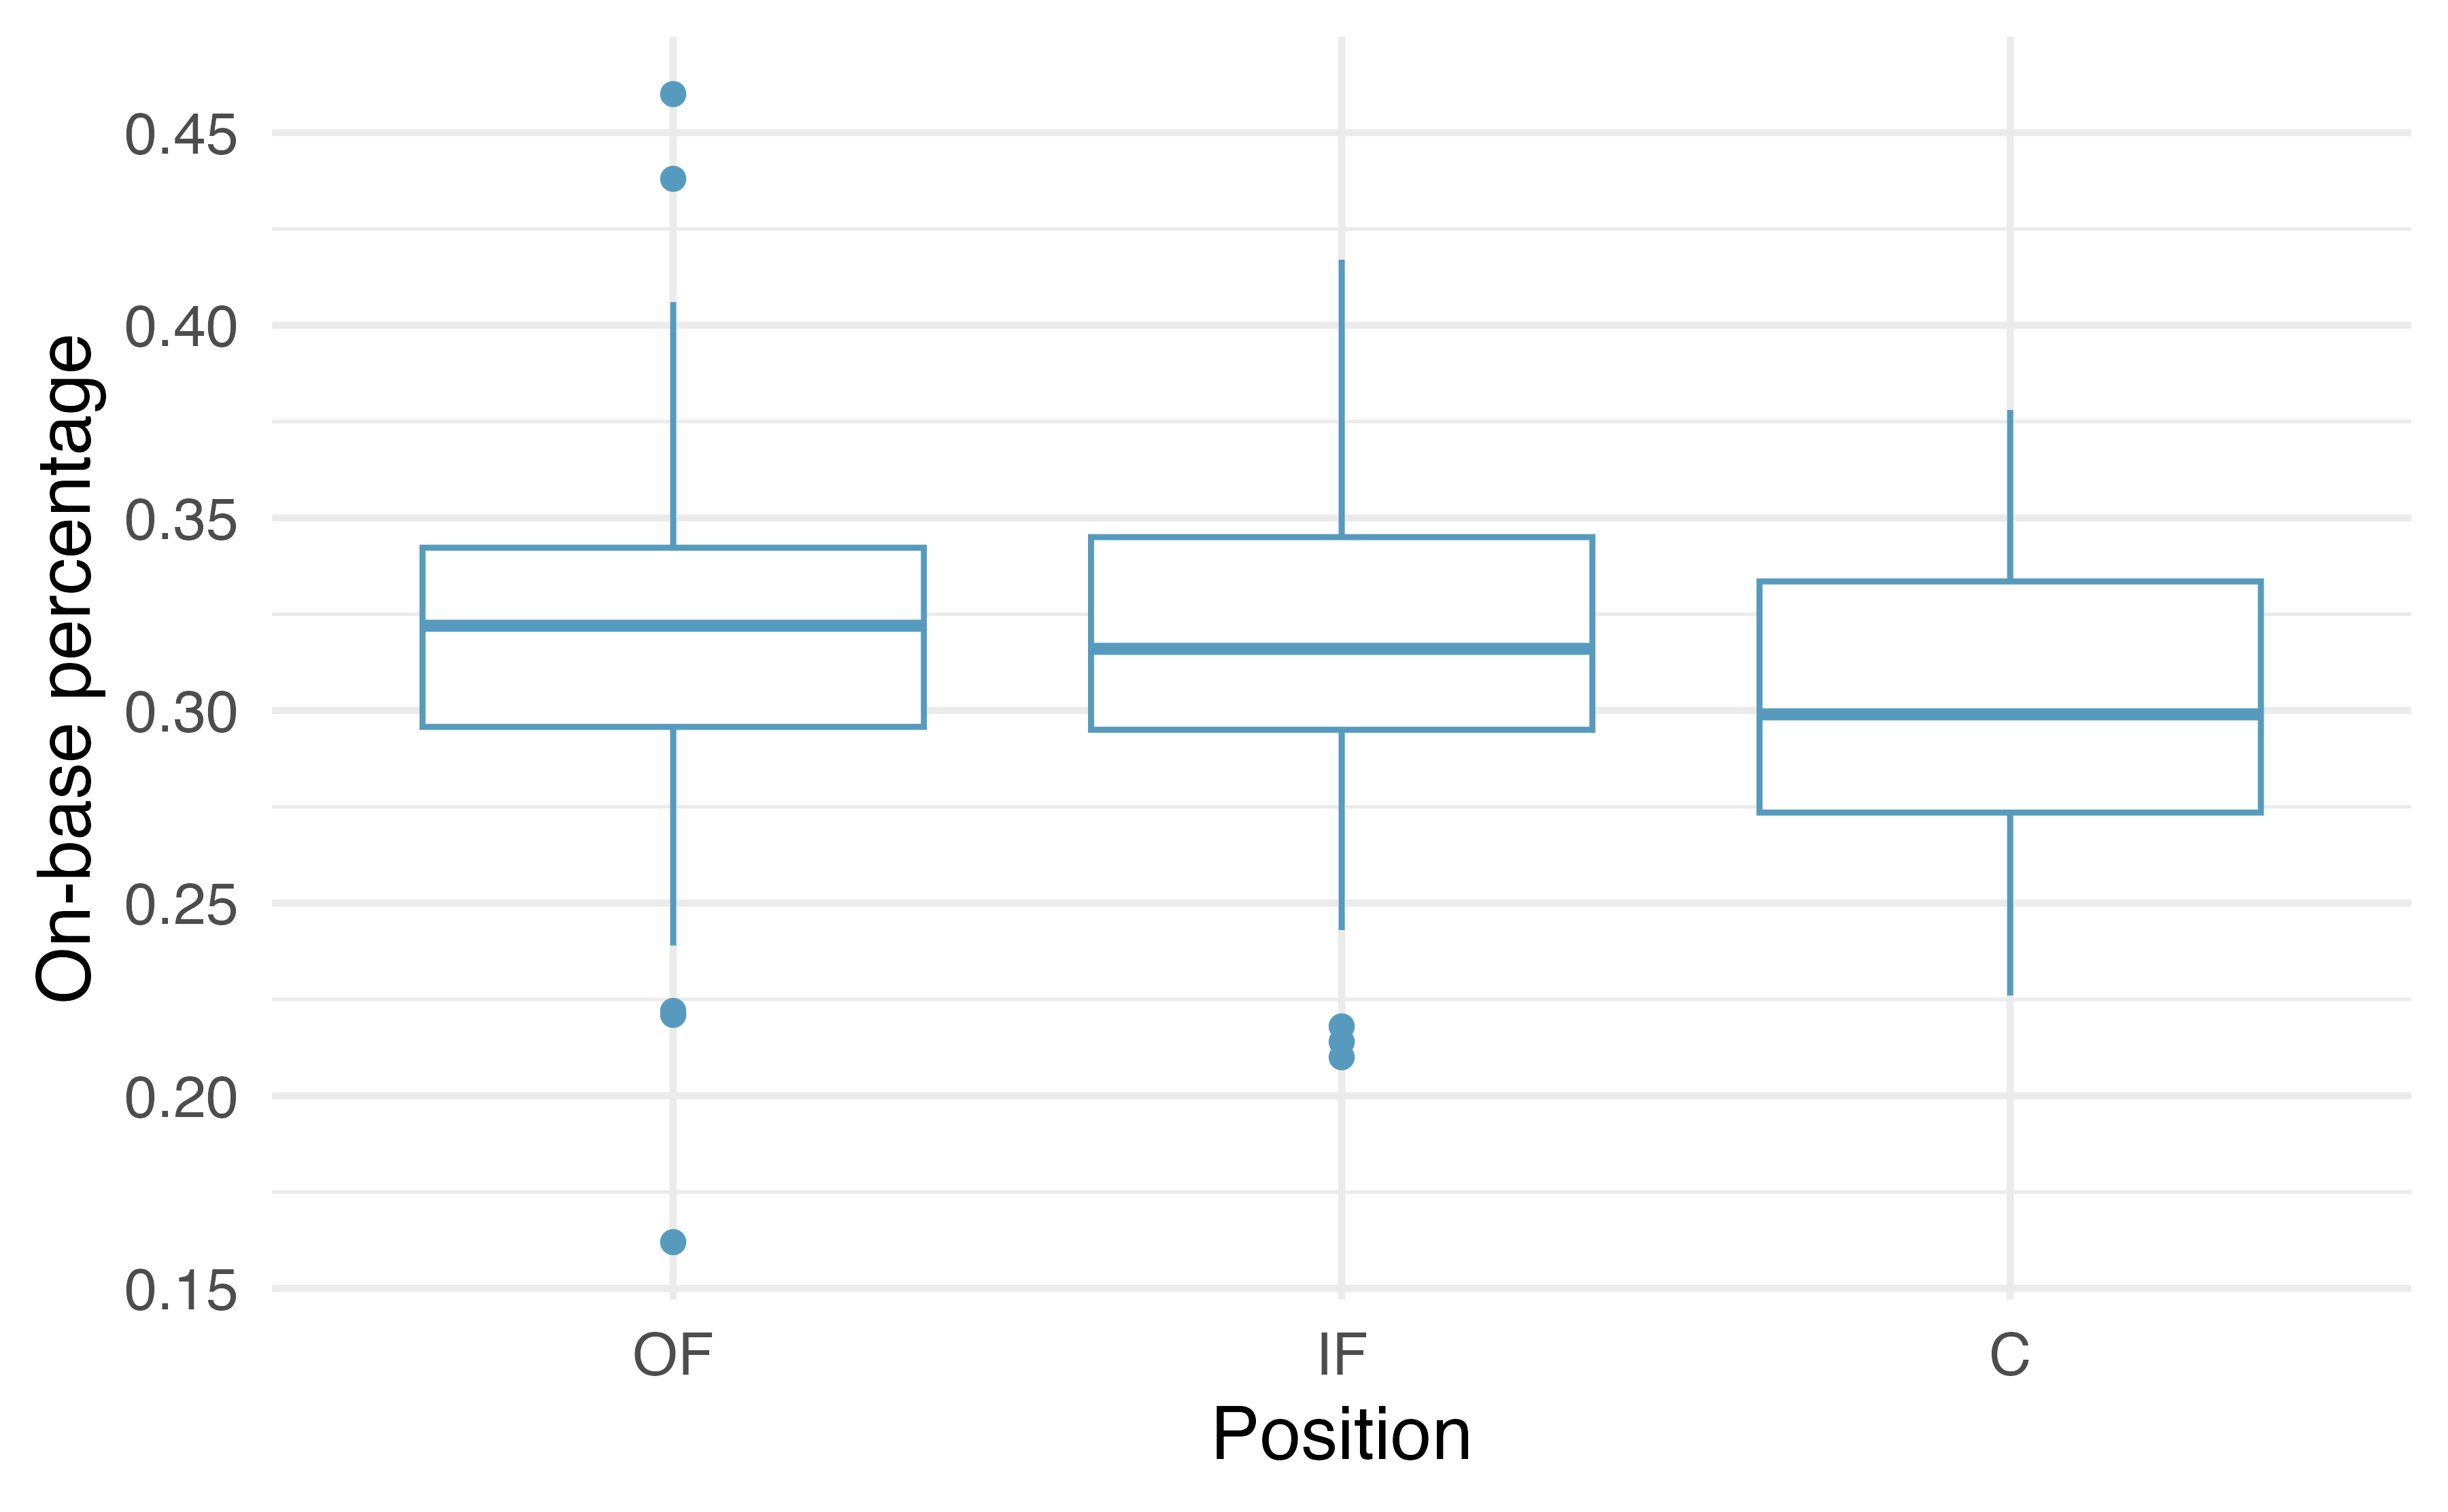 Side-by-side box plots describing on-base percentage broken down by outfield, infield, or catcher.  The catchers seems to have a slightly lower on-base percentage, but the vast majority of players have an on-base percentage 0.27 and 0.35.